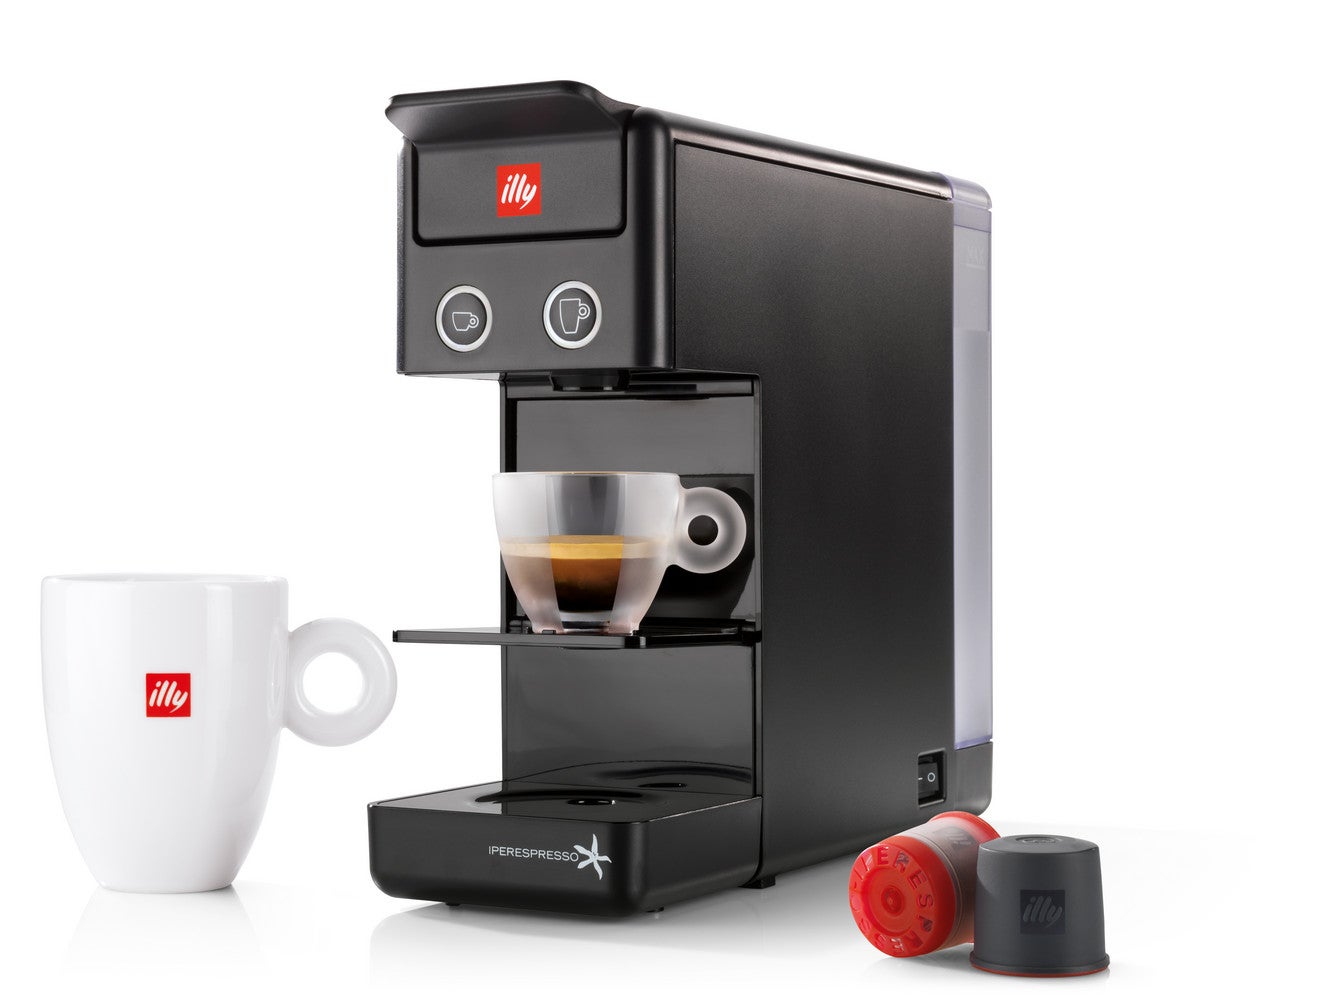 Celebrate National Coffee Day with illy